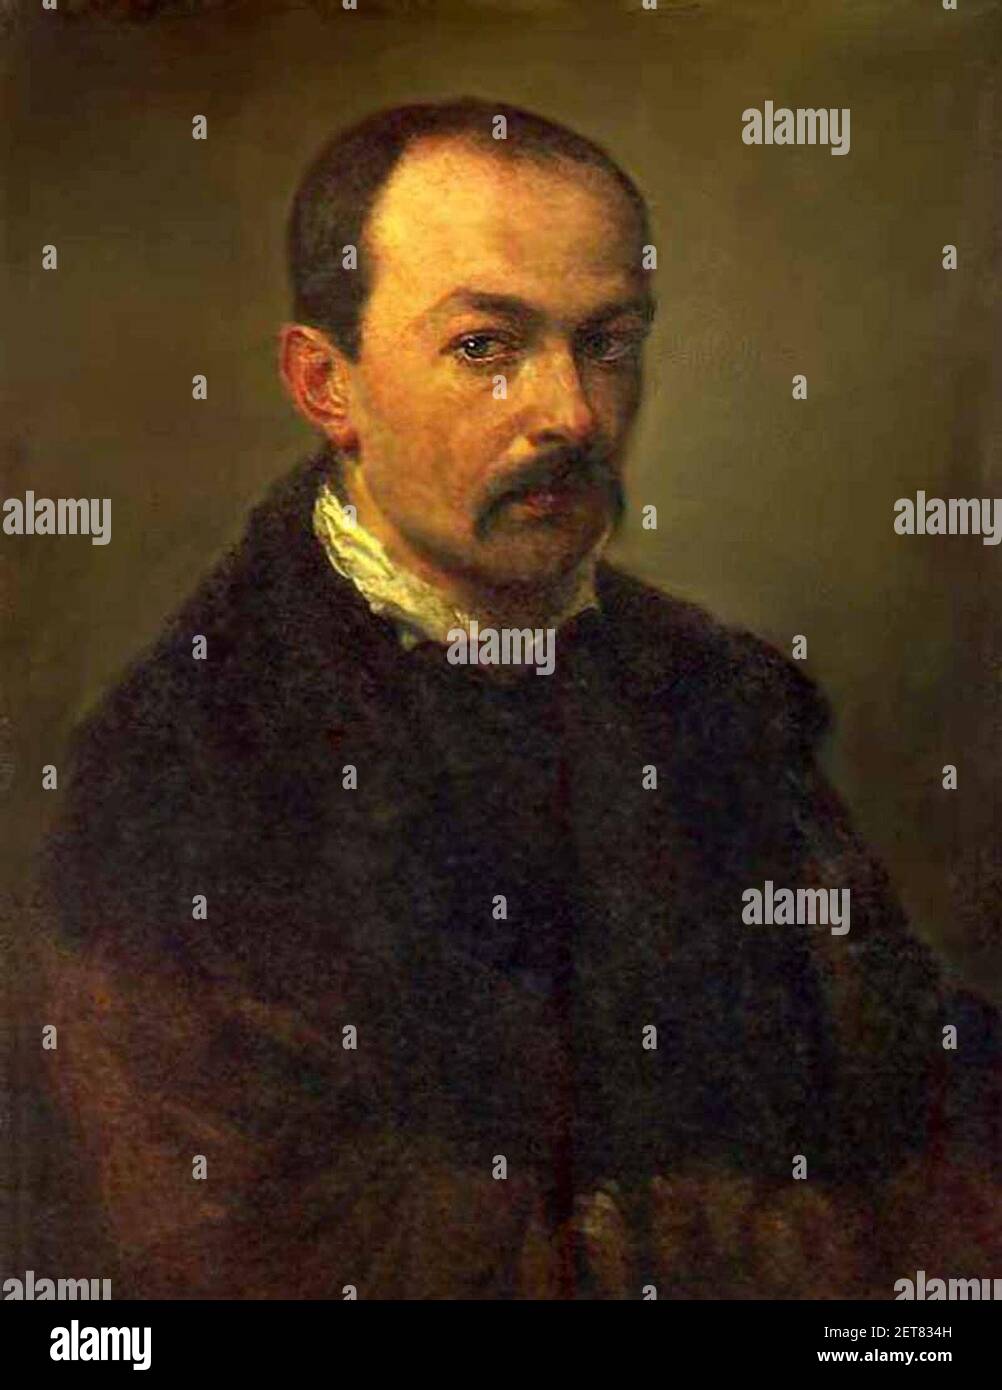 Pavel fedotov 1815 1852. Banque D'Images